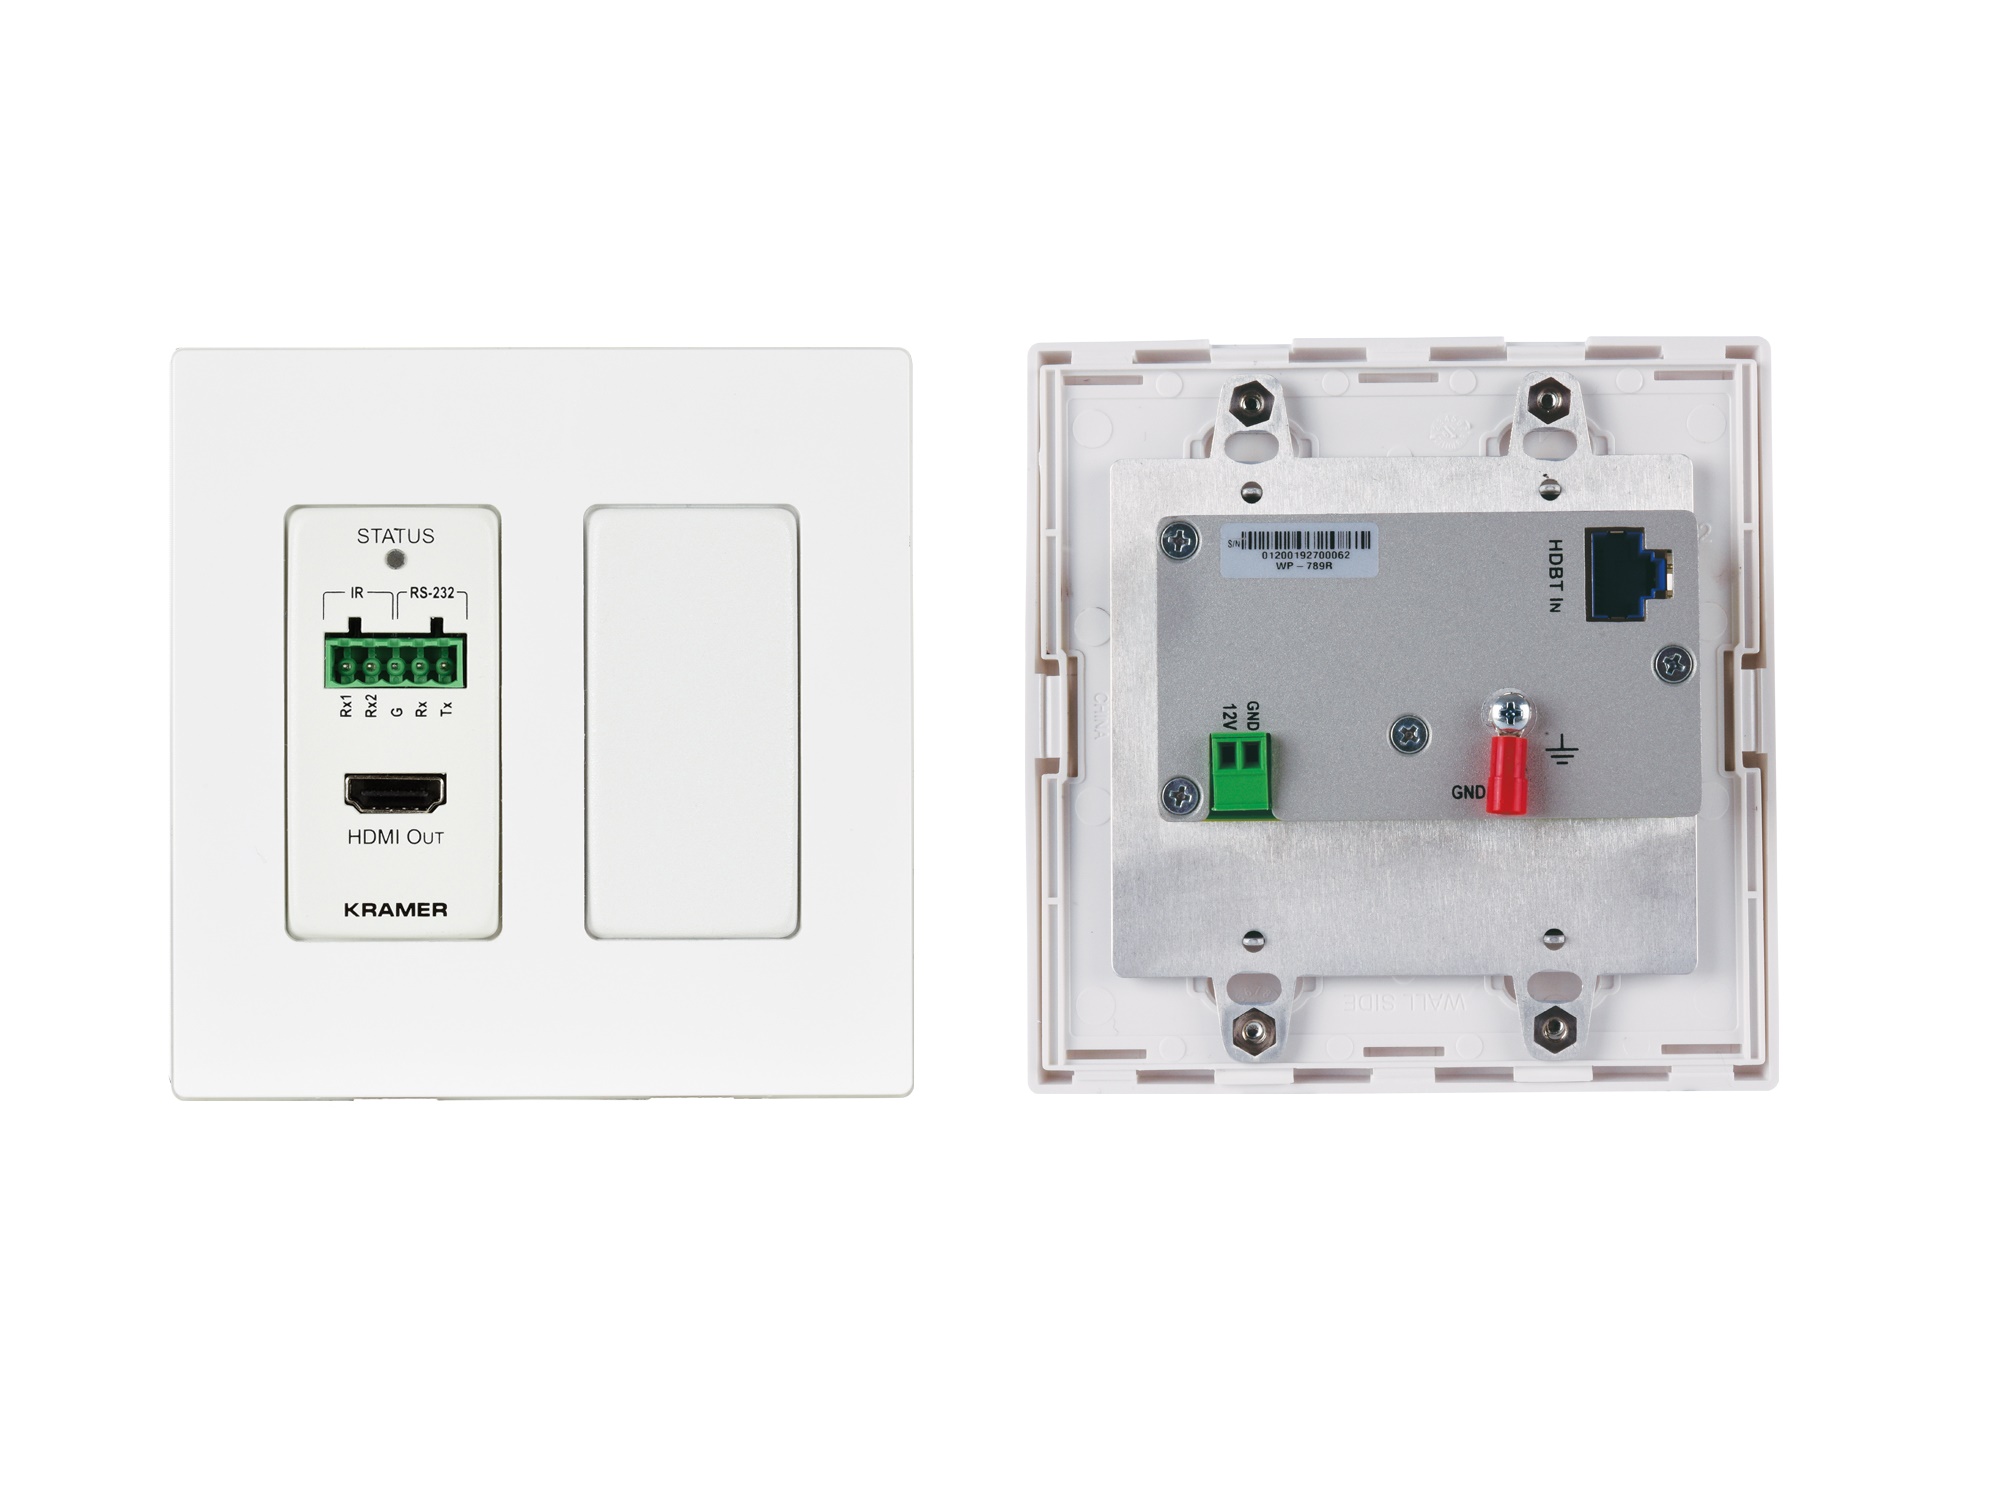 WP-789R/US-D(W) US-D-Size Wall-Plate Extender (Receiver) with White Decora Design Frame by Kramer